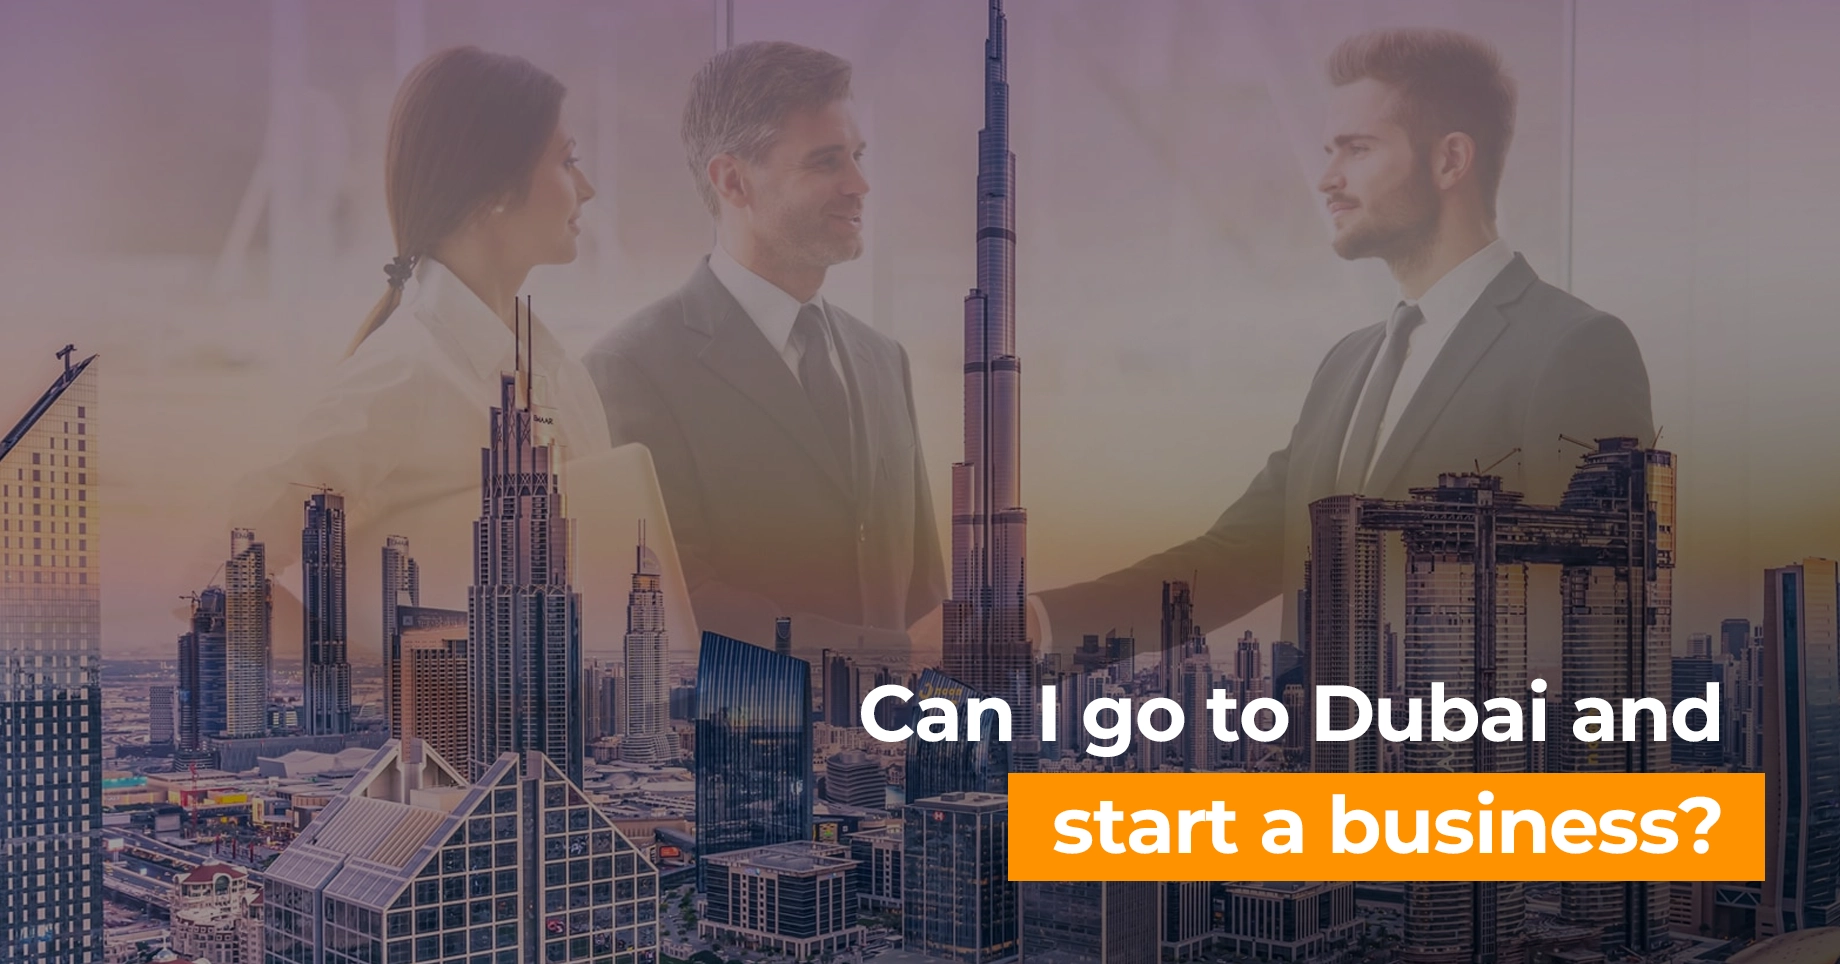 Can I go to Dubai and start a business?